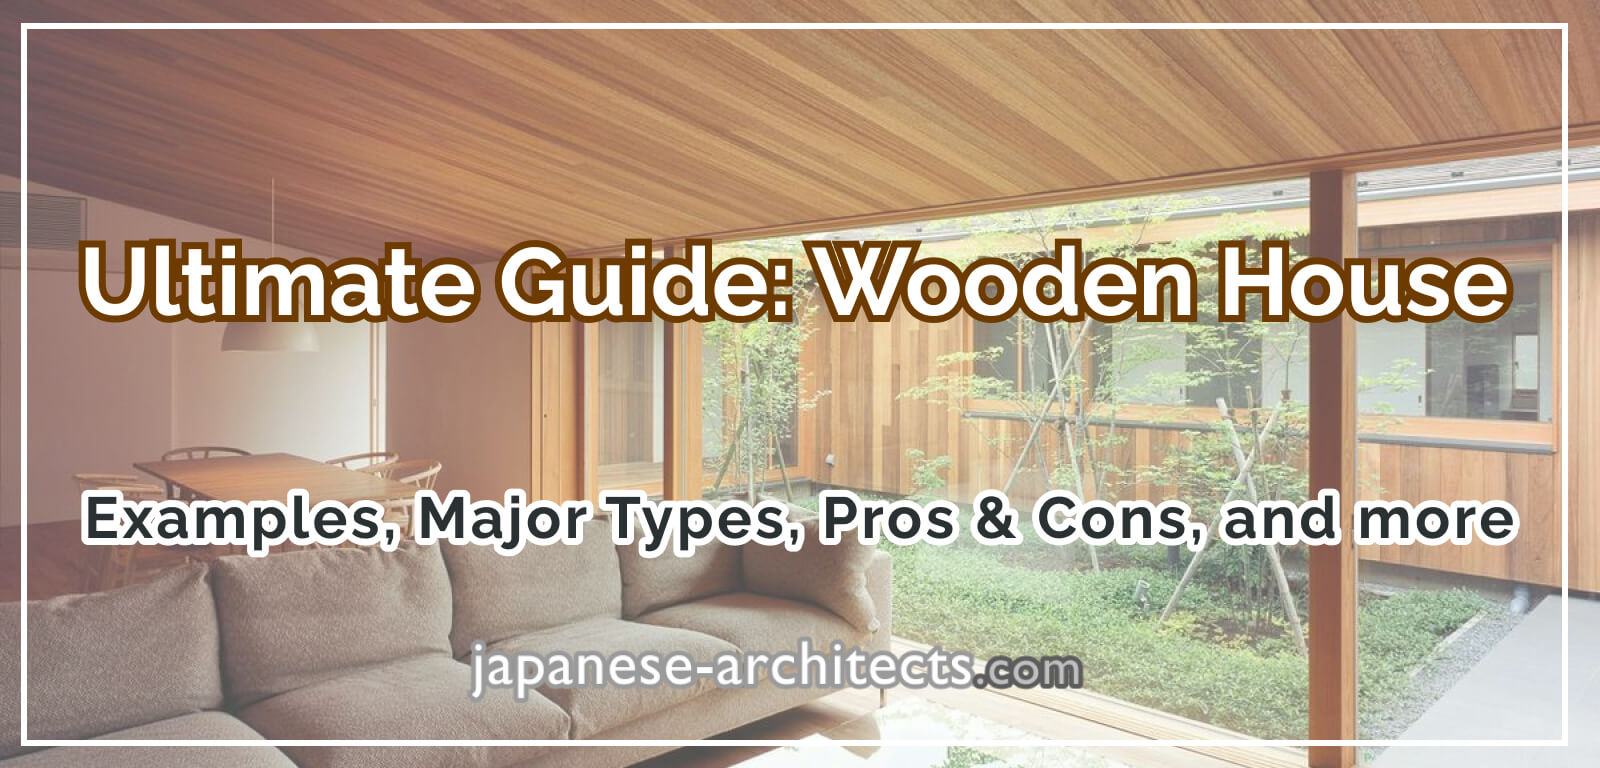 Ultimate Guide: Wooden House